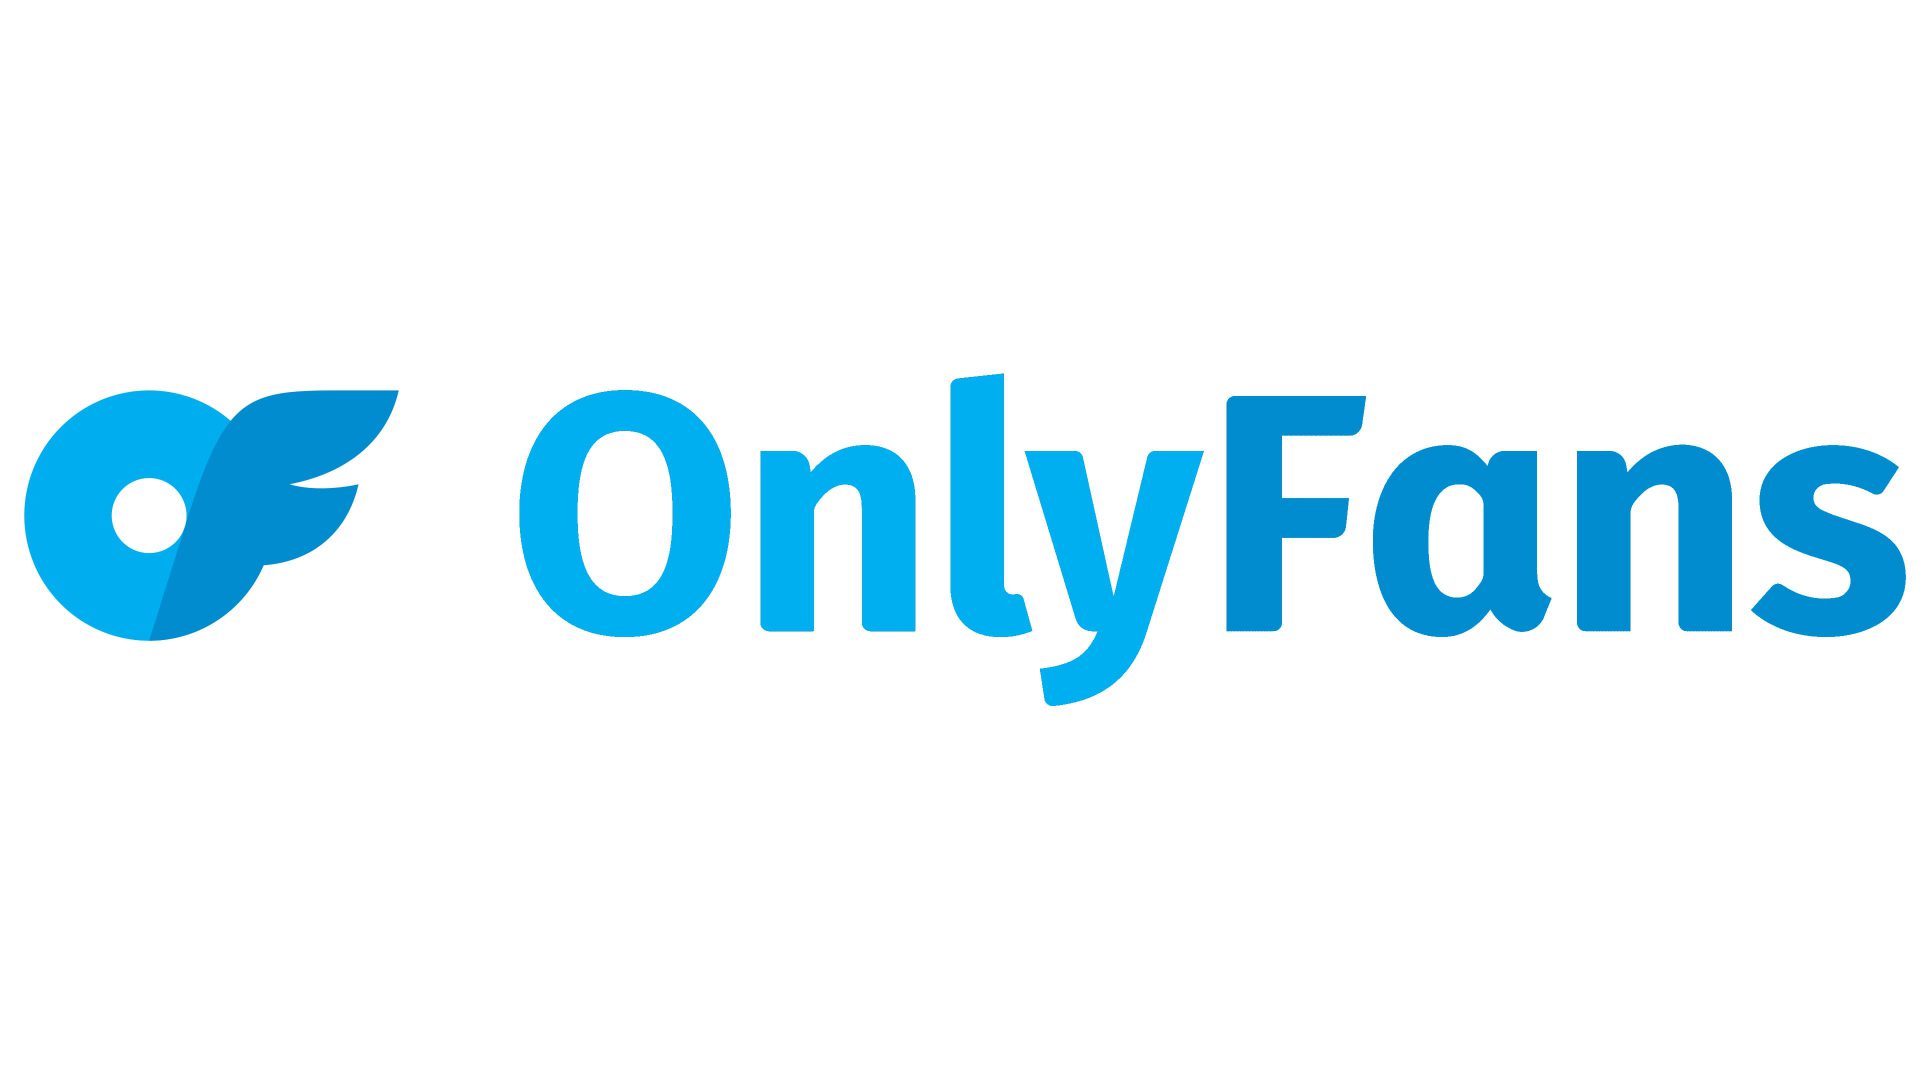 What Is An Onlyfans Website